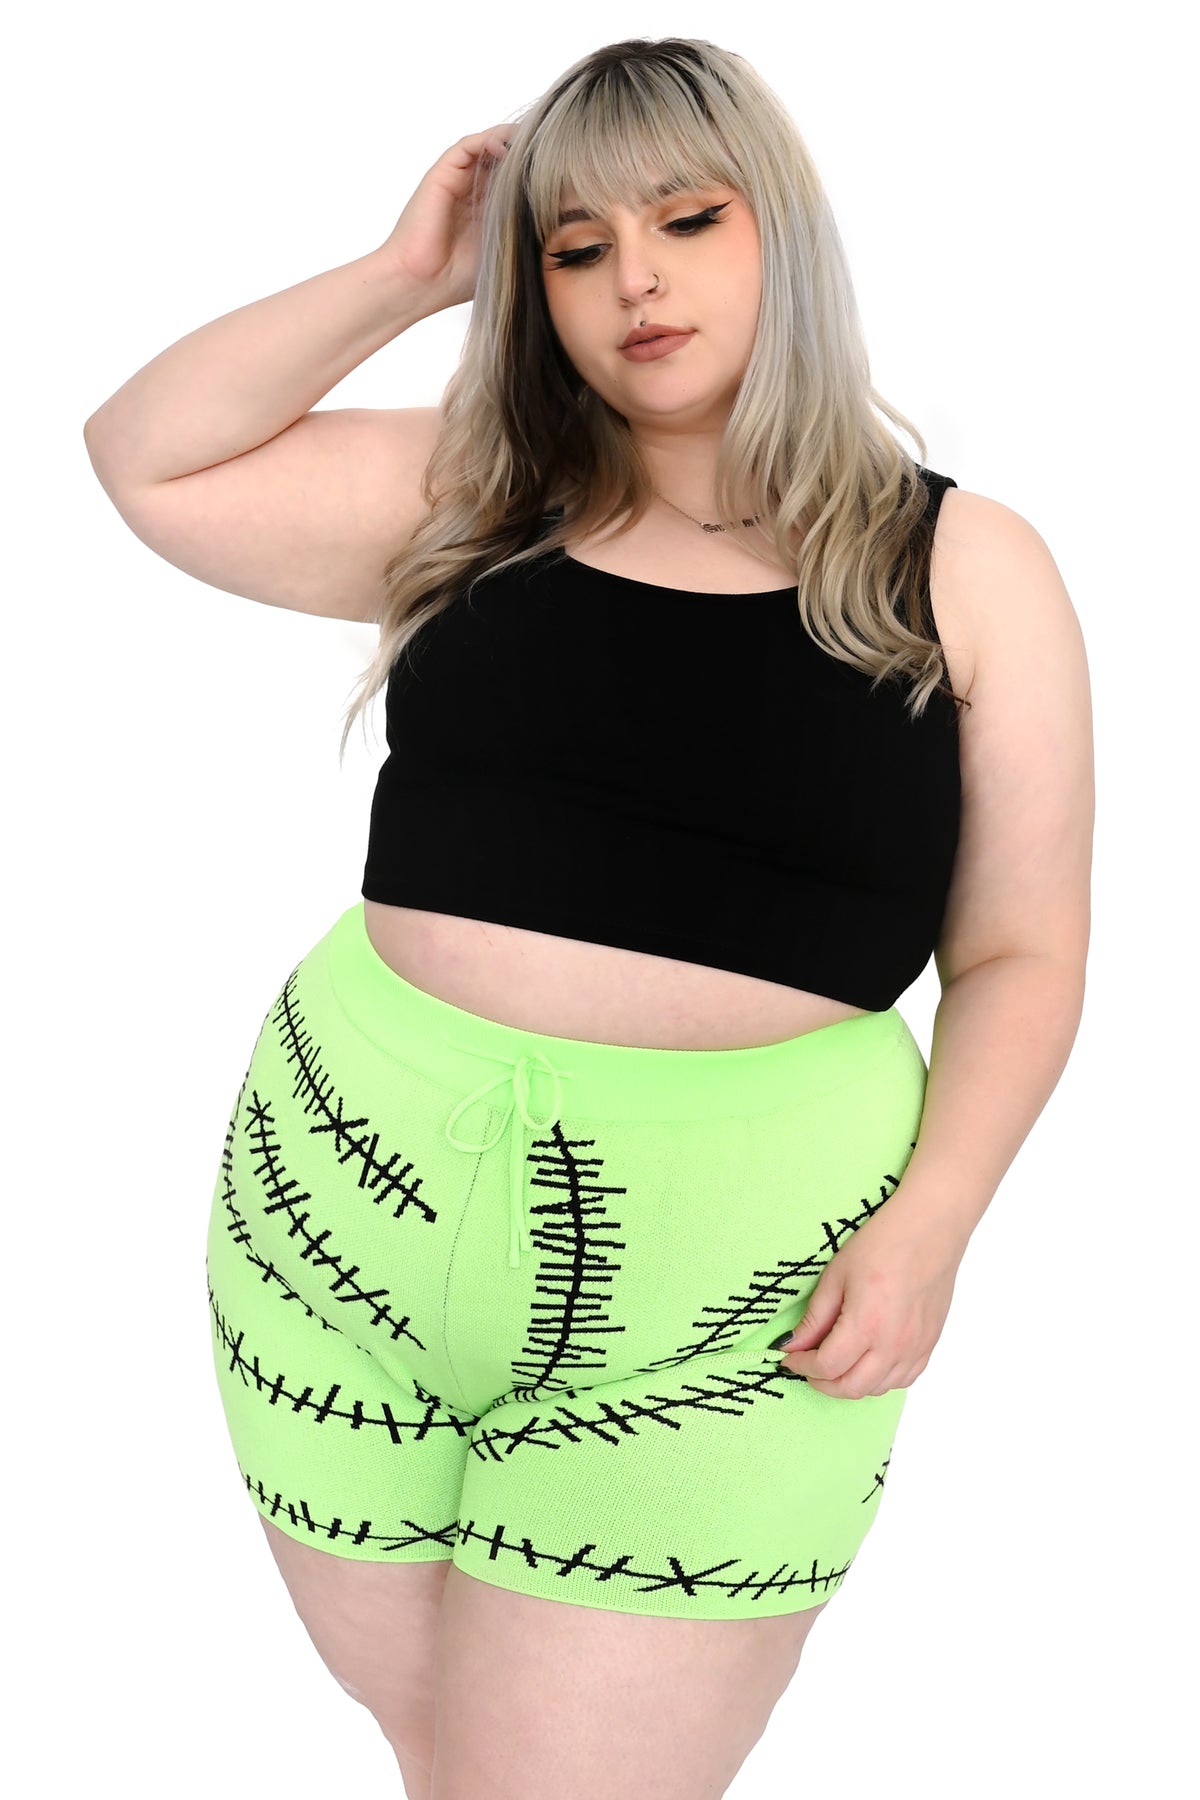 green glow in the dark shorts with black stitches pattern